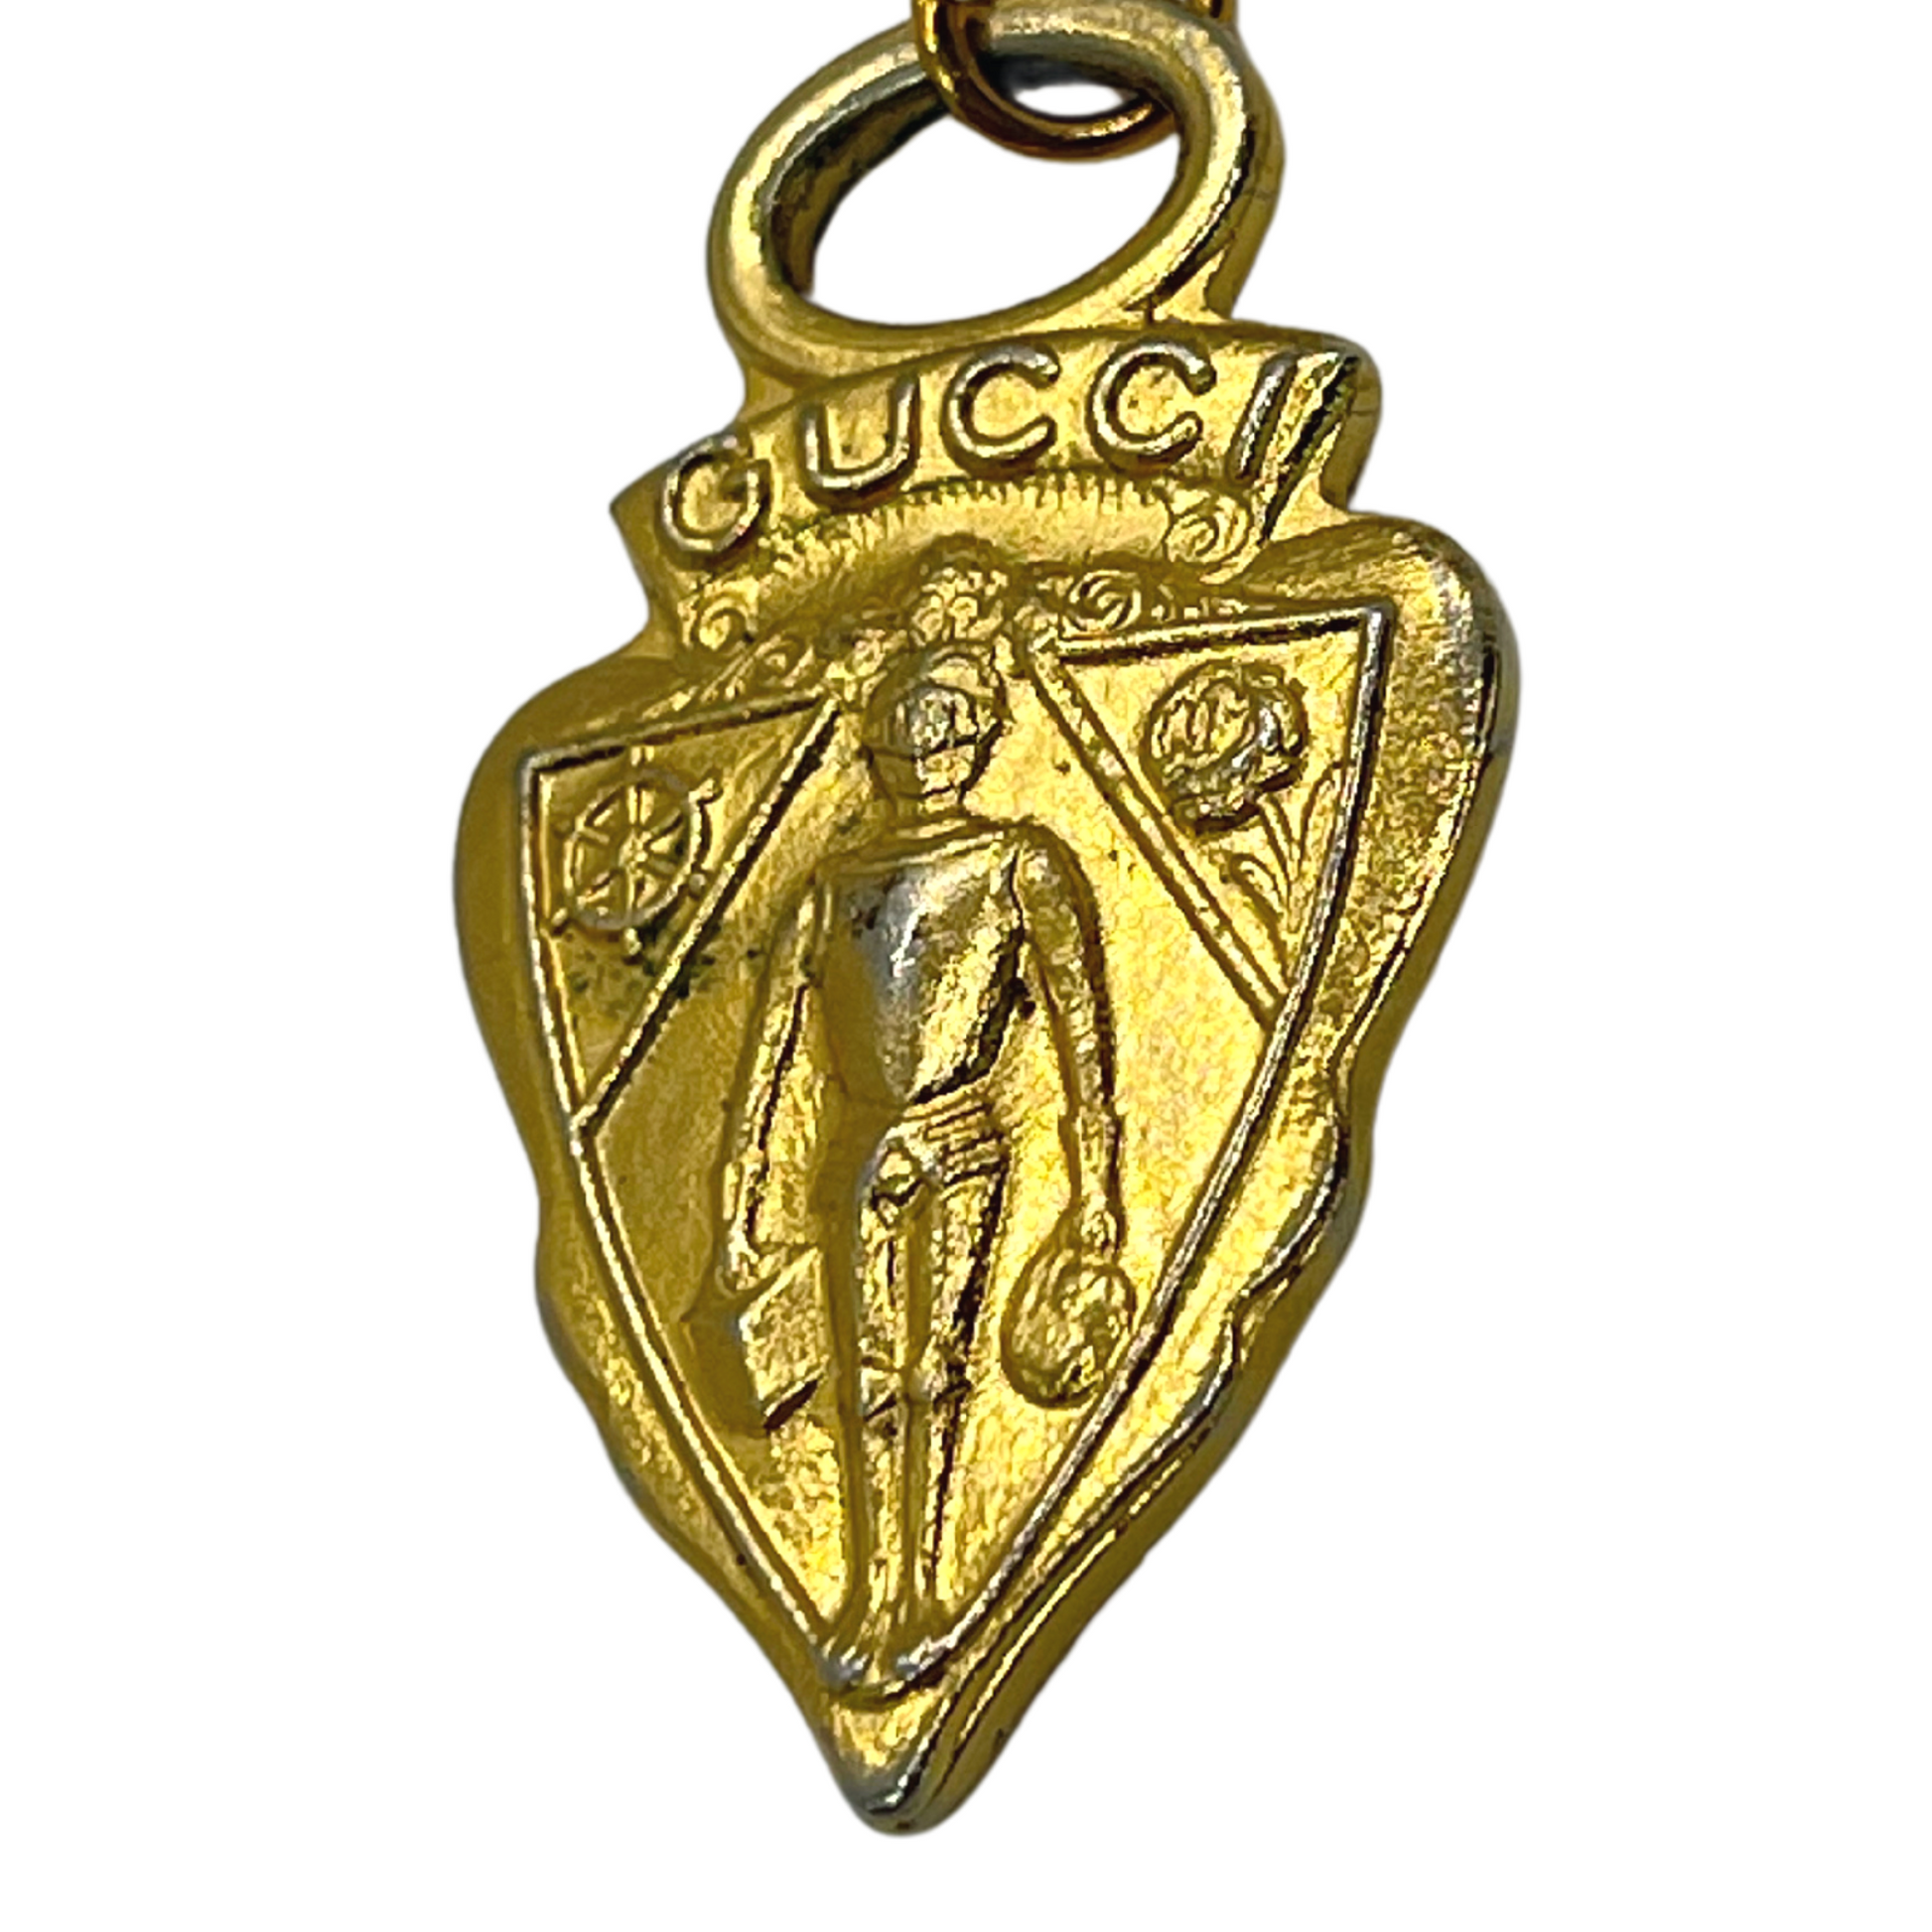 Authentic Gucci 'Man of Honor' Pendant | Reworked Gold 15" Necklace